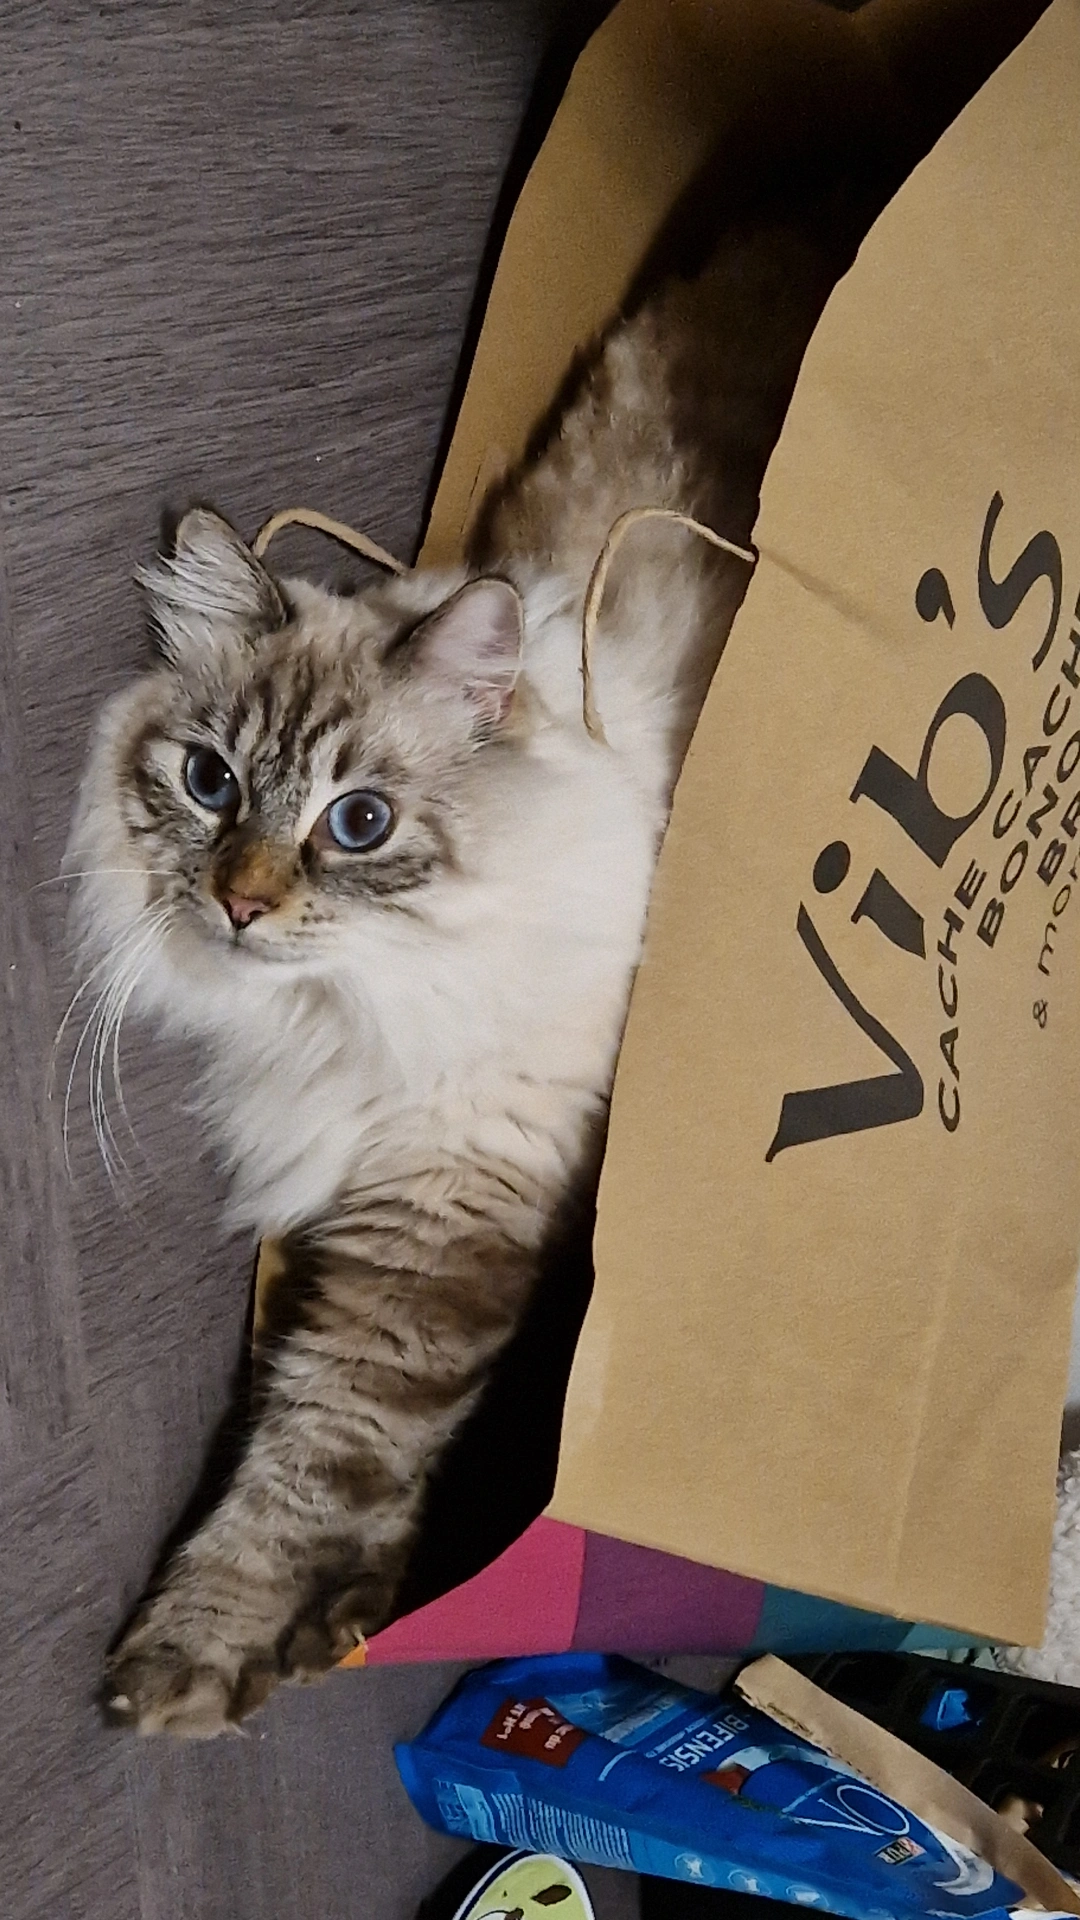 Chat, Carnivore, Felidae, Sleeve, Moustaches, Small To Medium-sized Cats, Domestic Short-haired Cat, Poil, Patte, Box, LÃ©gende de la photo, Font, Packaging And Labeling, Ragdoll, Paper Product